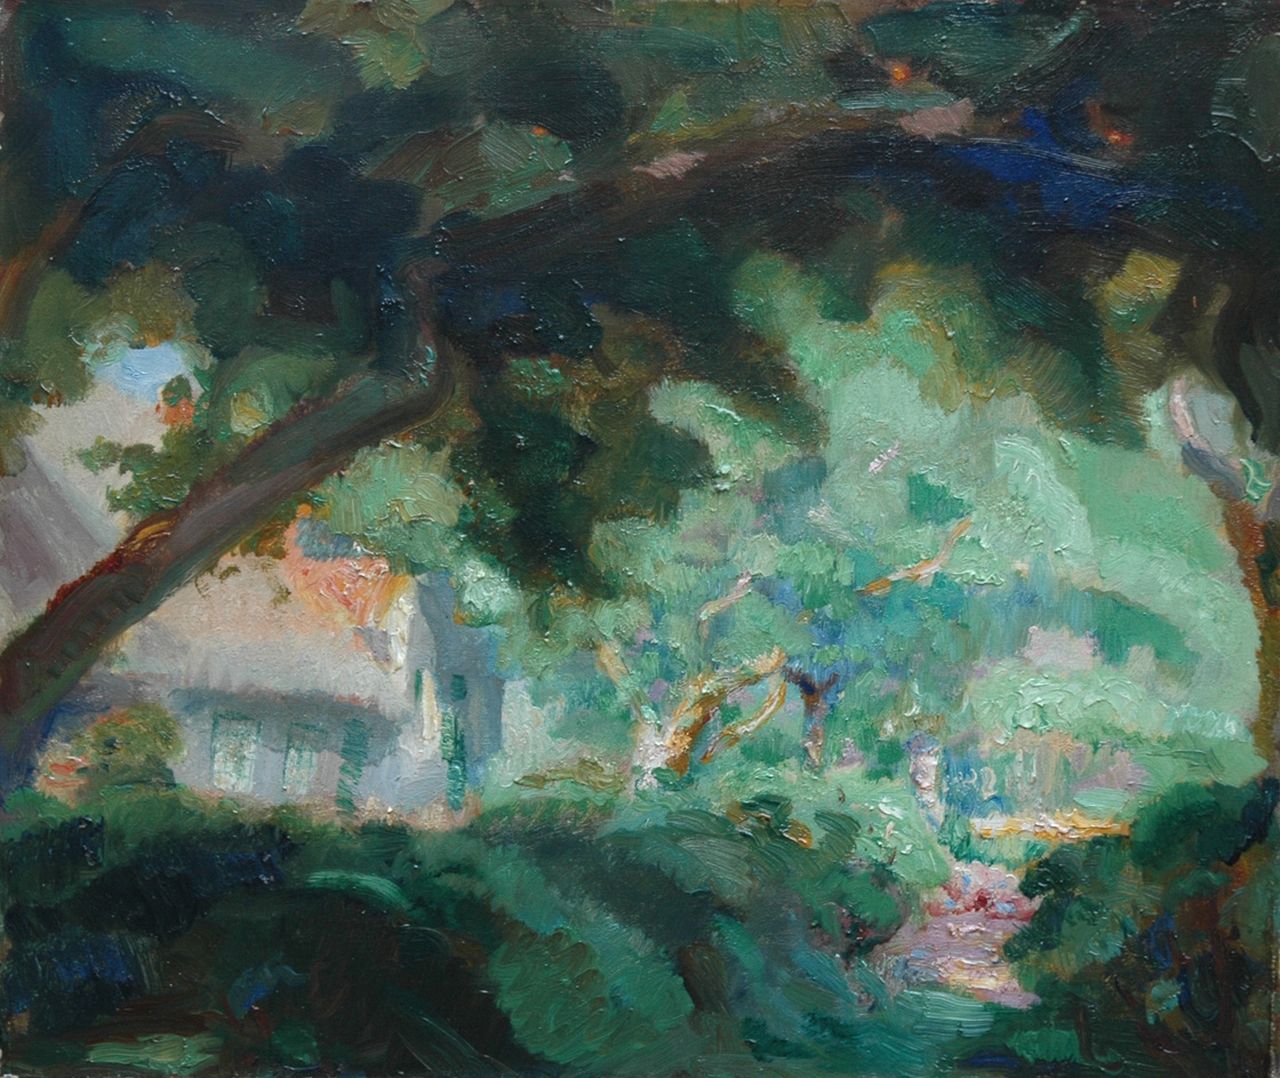 Nico Baak | House in the woods, oil on canvas, 41.4 x 48.4 cm